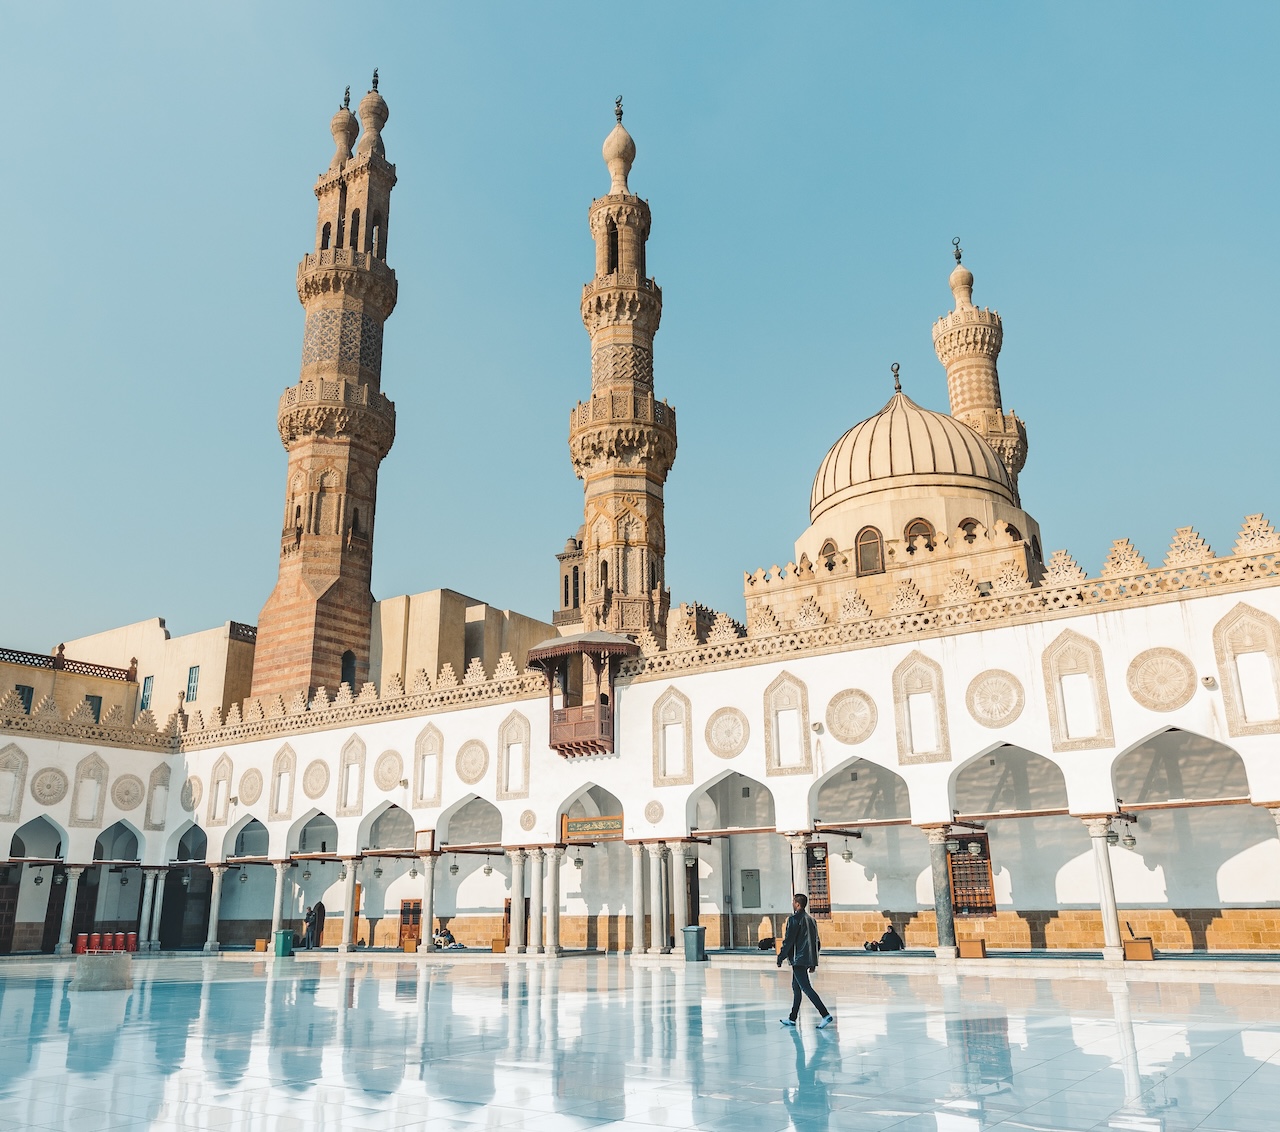 The largest metropolitan area in Africa, greater Cairo packs in more than 22 million residents and millennia of history. Here’s how to make the most of a day in the Egyptian capital.